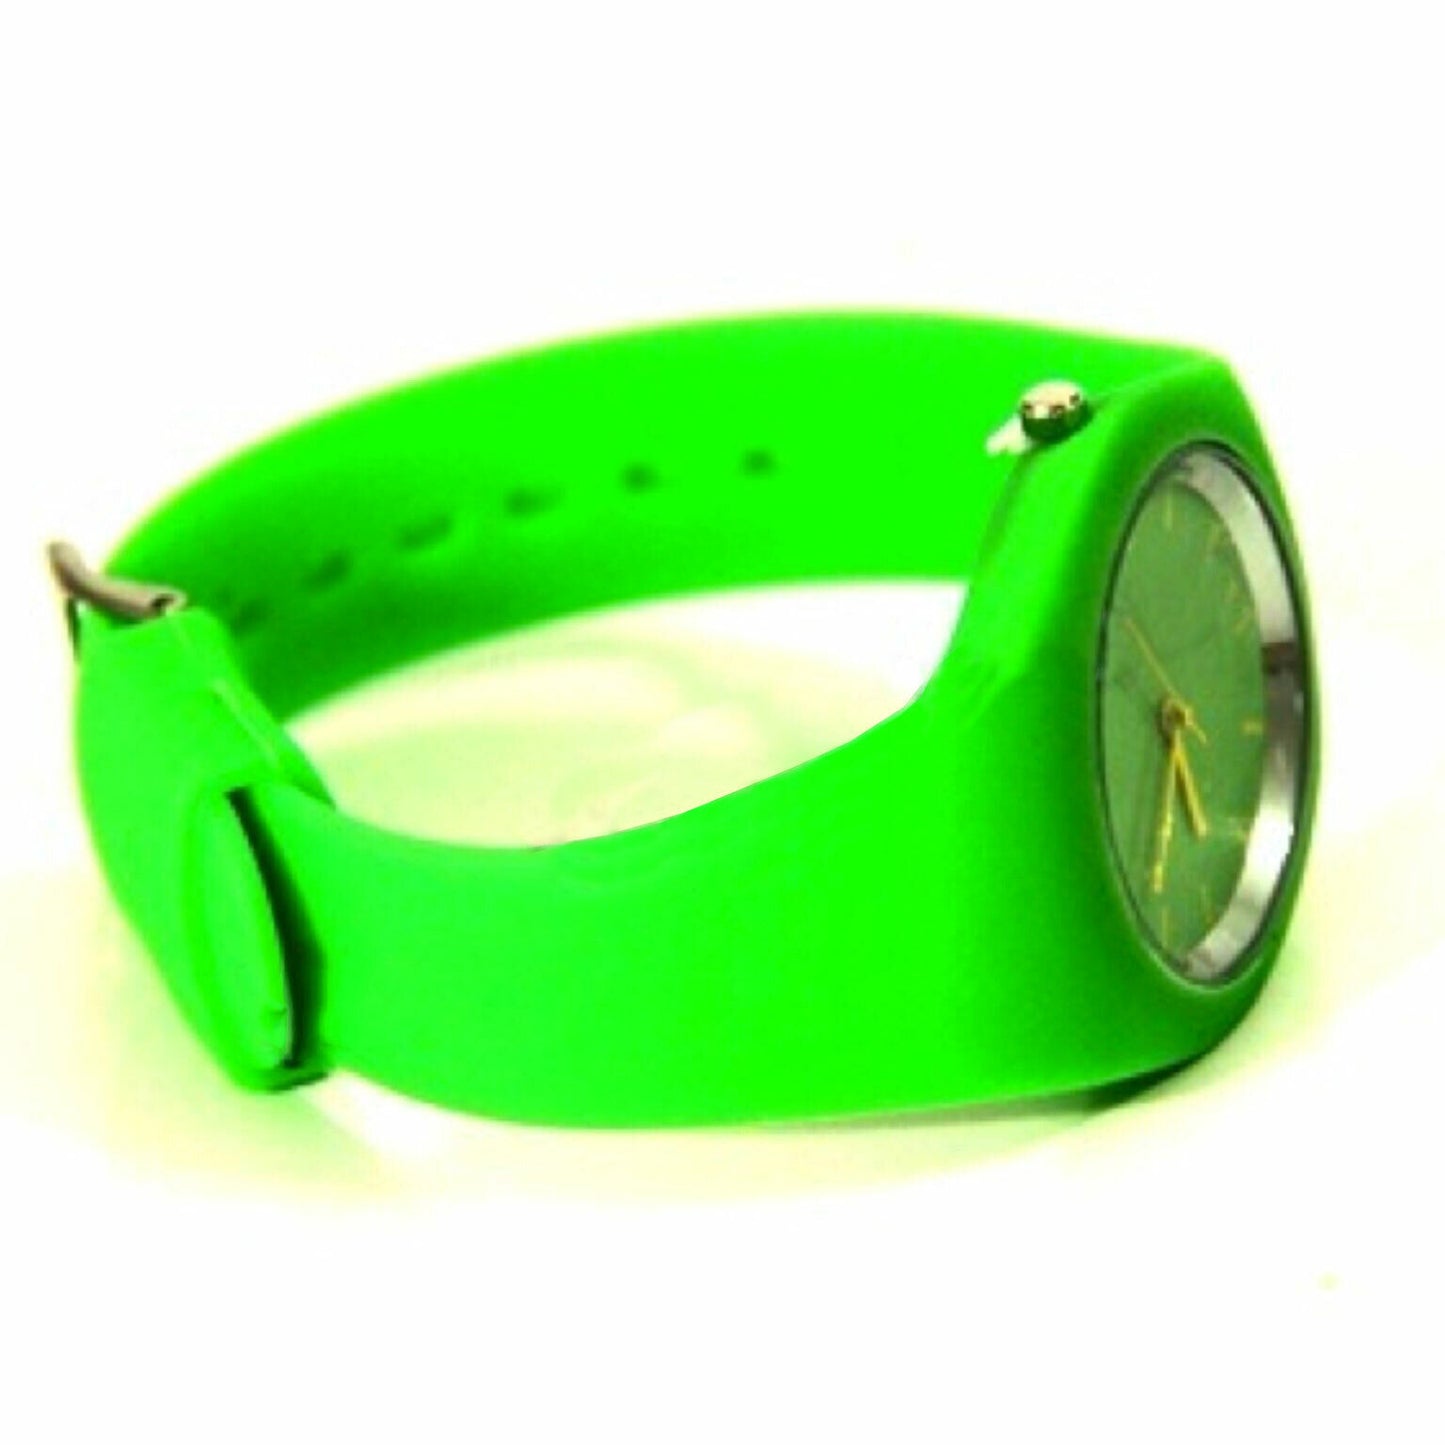 KASA Ice Cool Green Colour Wrist Watch Unisex Ladies Men's Silicone Free Shipping